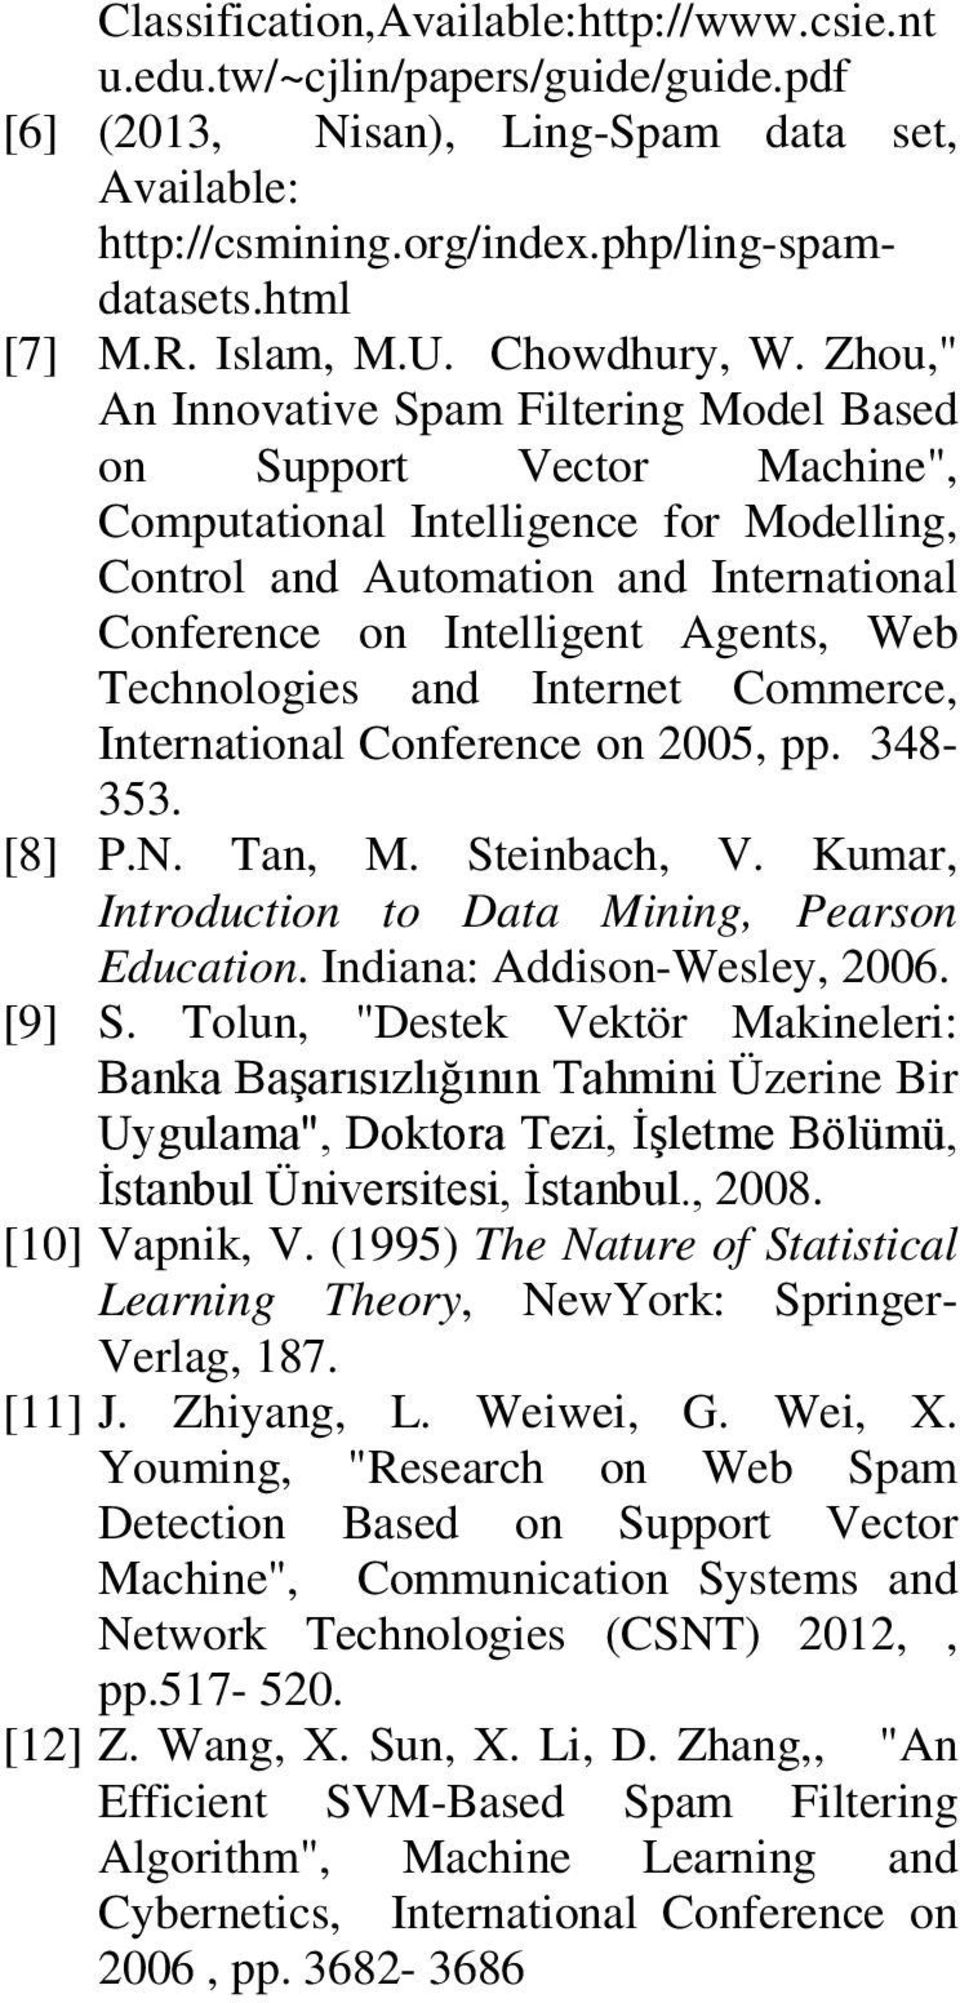 and Internet Commerce, Internatonal Conference on 005, pp. 348-353. [8] P.N. an, M. Stenbach, V. Kumar, Introducton to Data Mnng, Pearson Educaton. Indana: Addson-Wesle, 006. [9] S.